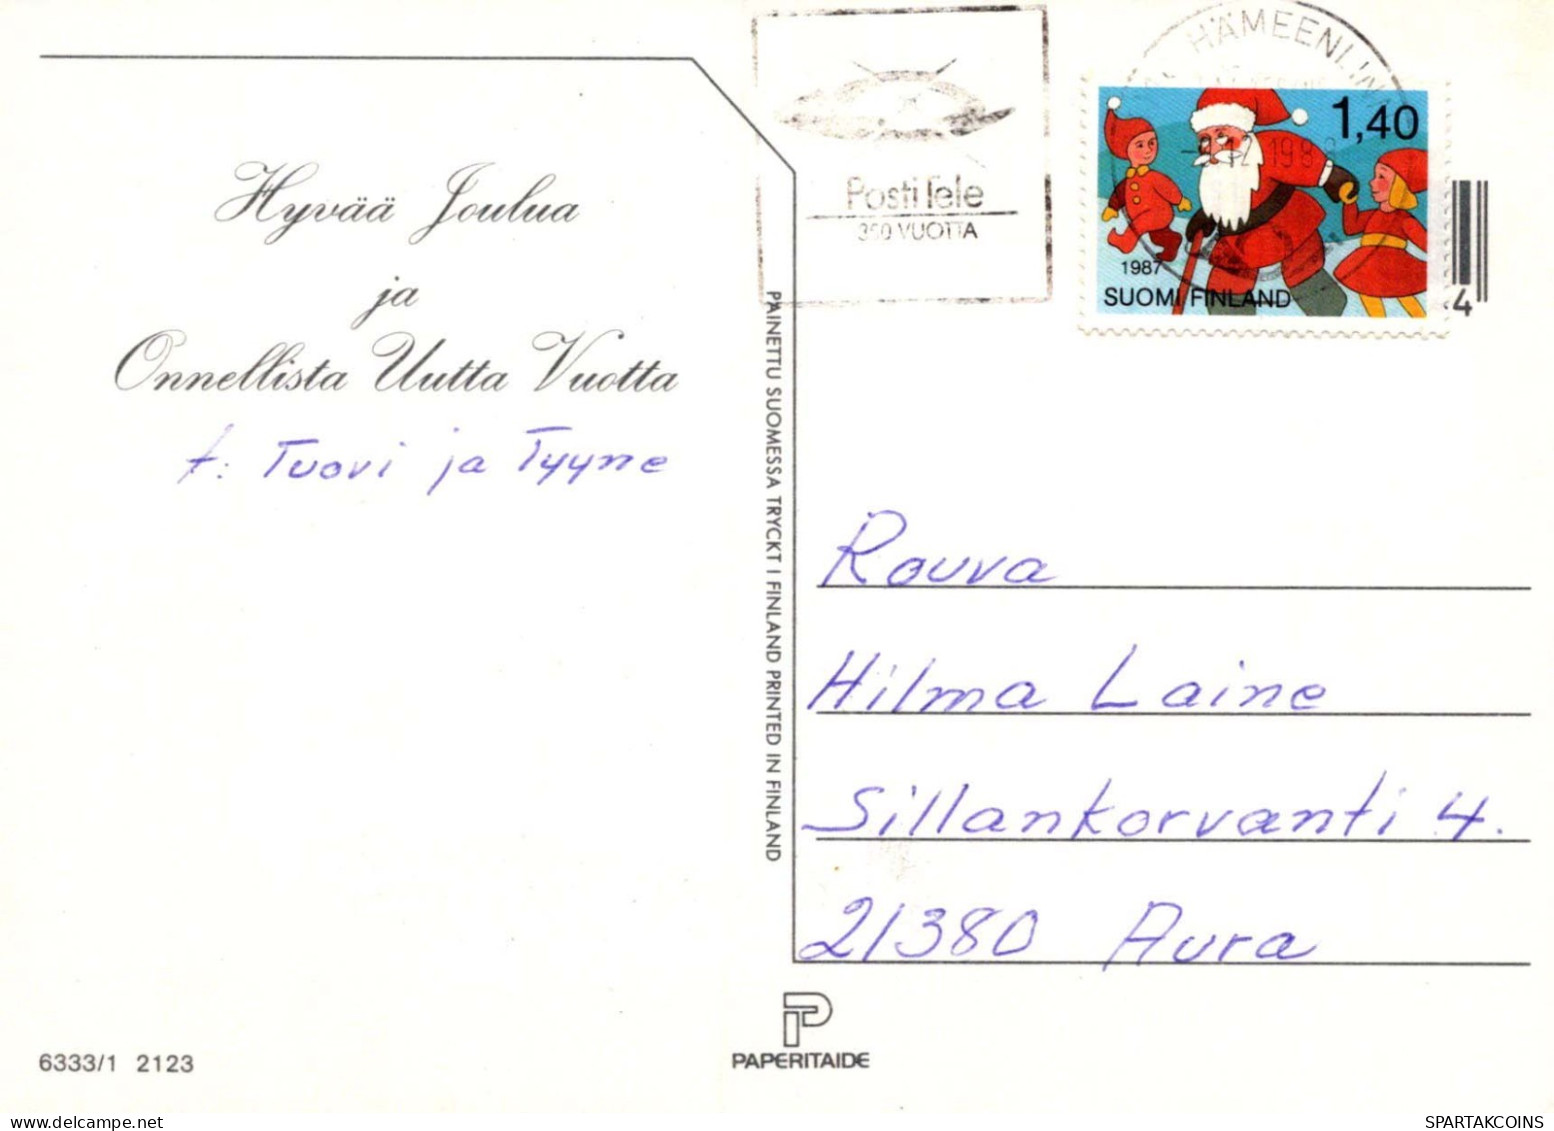 Buon Anno Natale CANDELA Vintage Cartolina CPSM #PAW180.IT - New Year